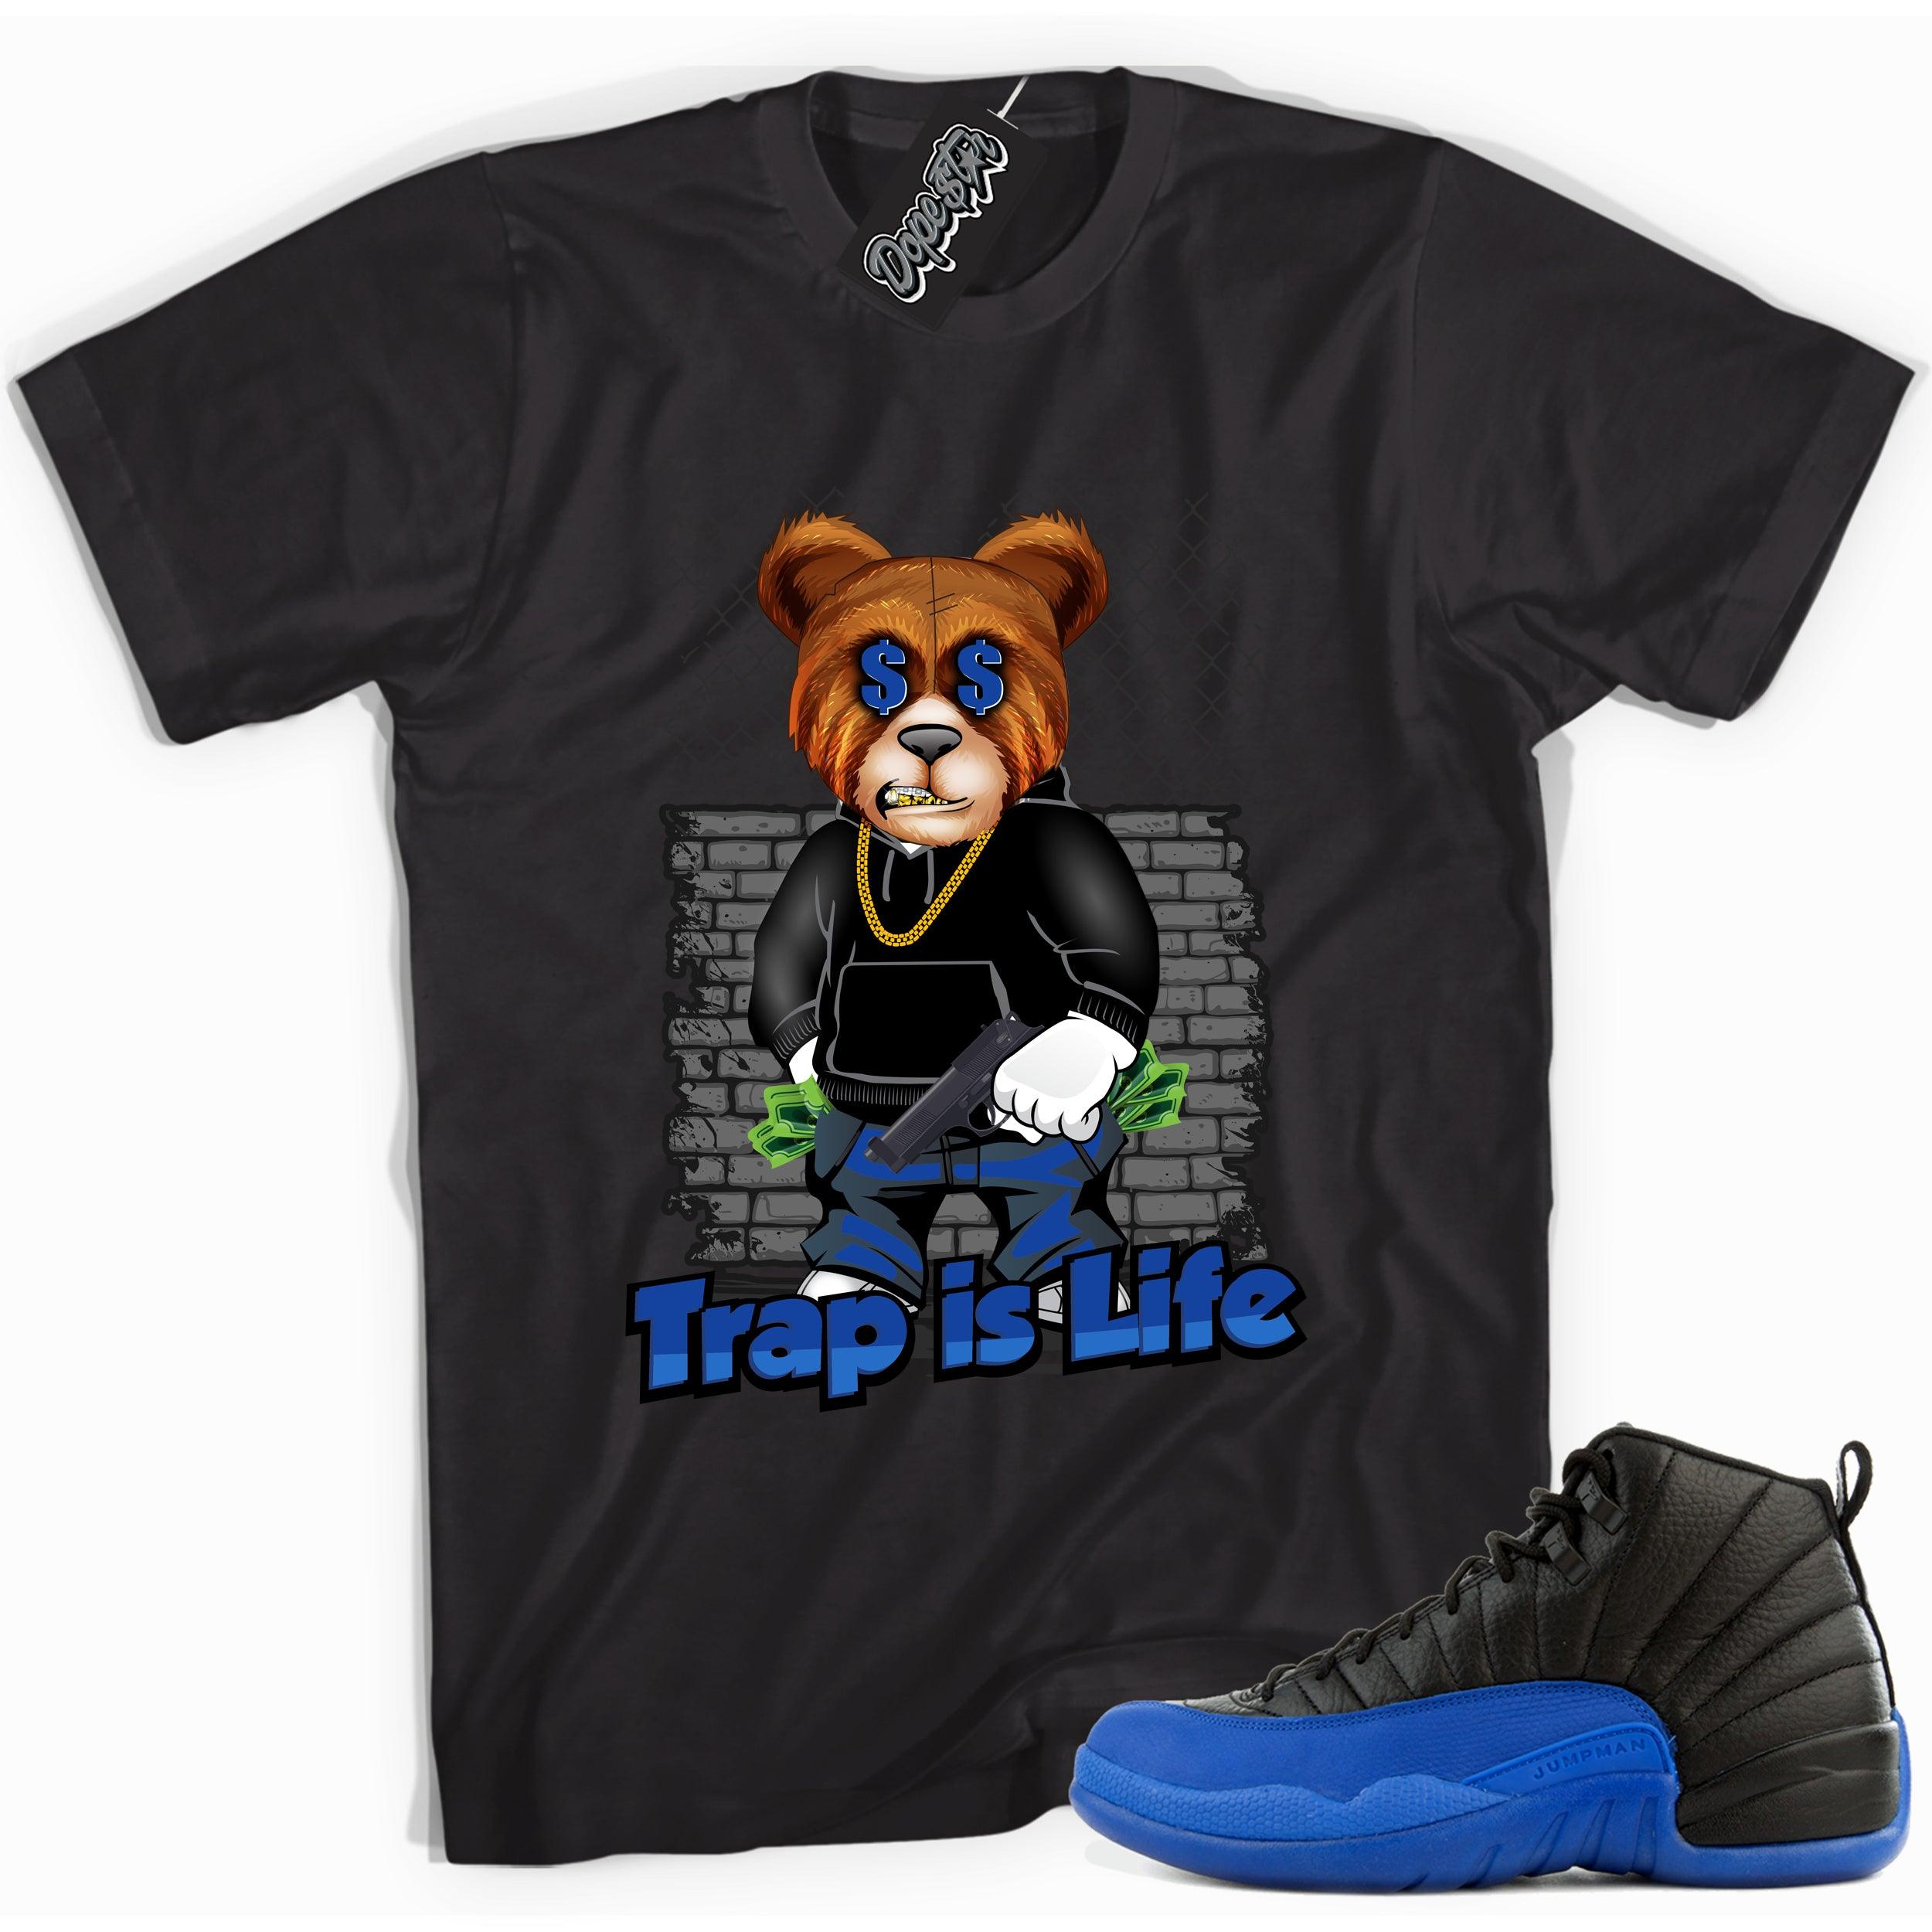 Cool black graphic tee with 'trap is life' print, that perfectly matches  Air Jordan 12 Retro Black Game Royal sneakers.